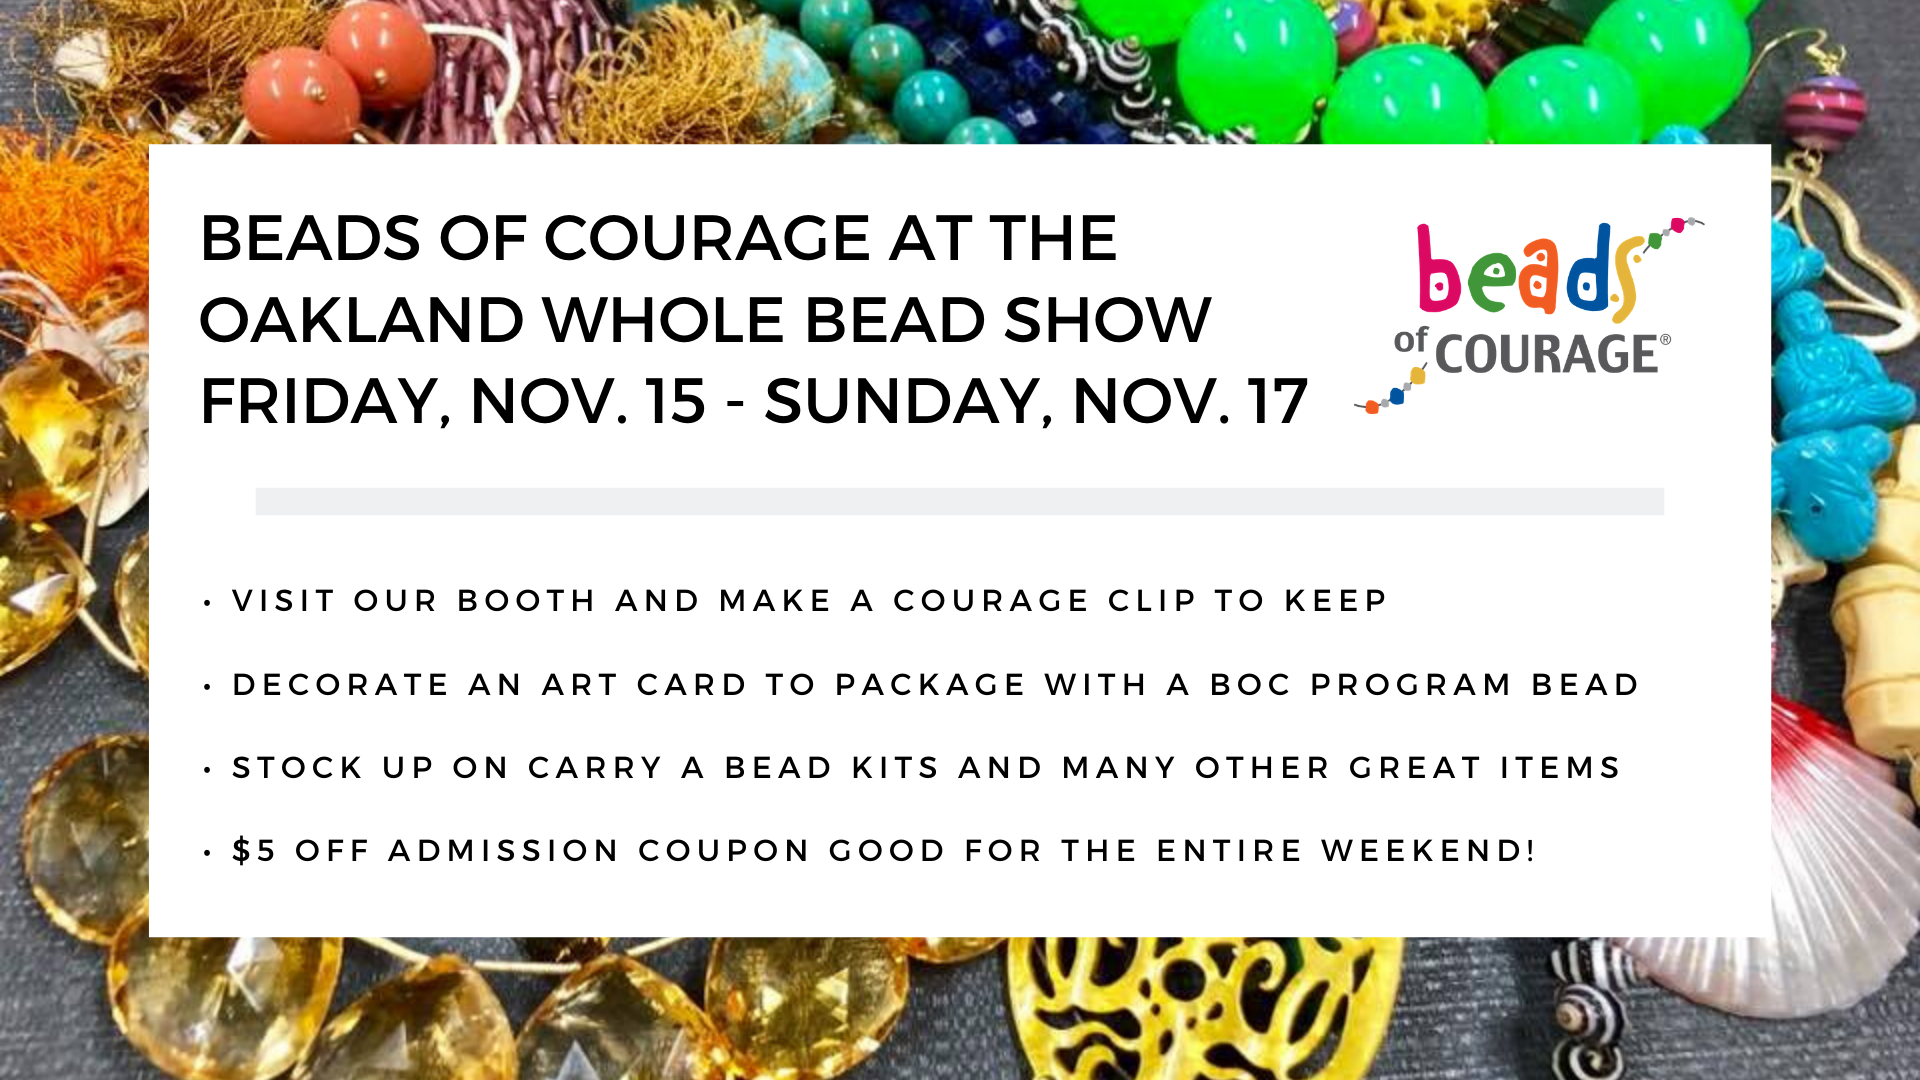 Whole Bead Show Oakland, Beads of Courage